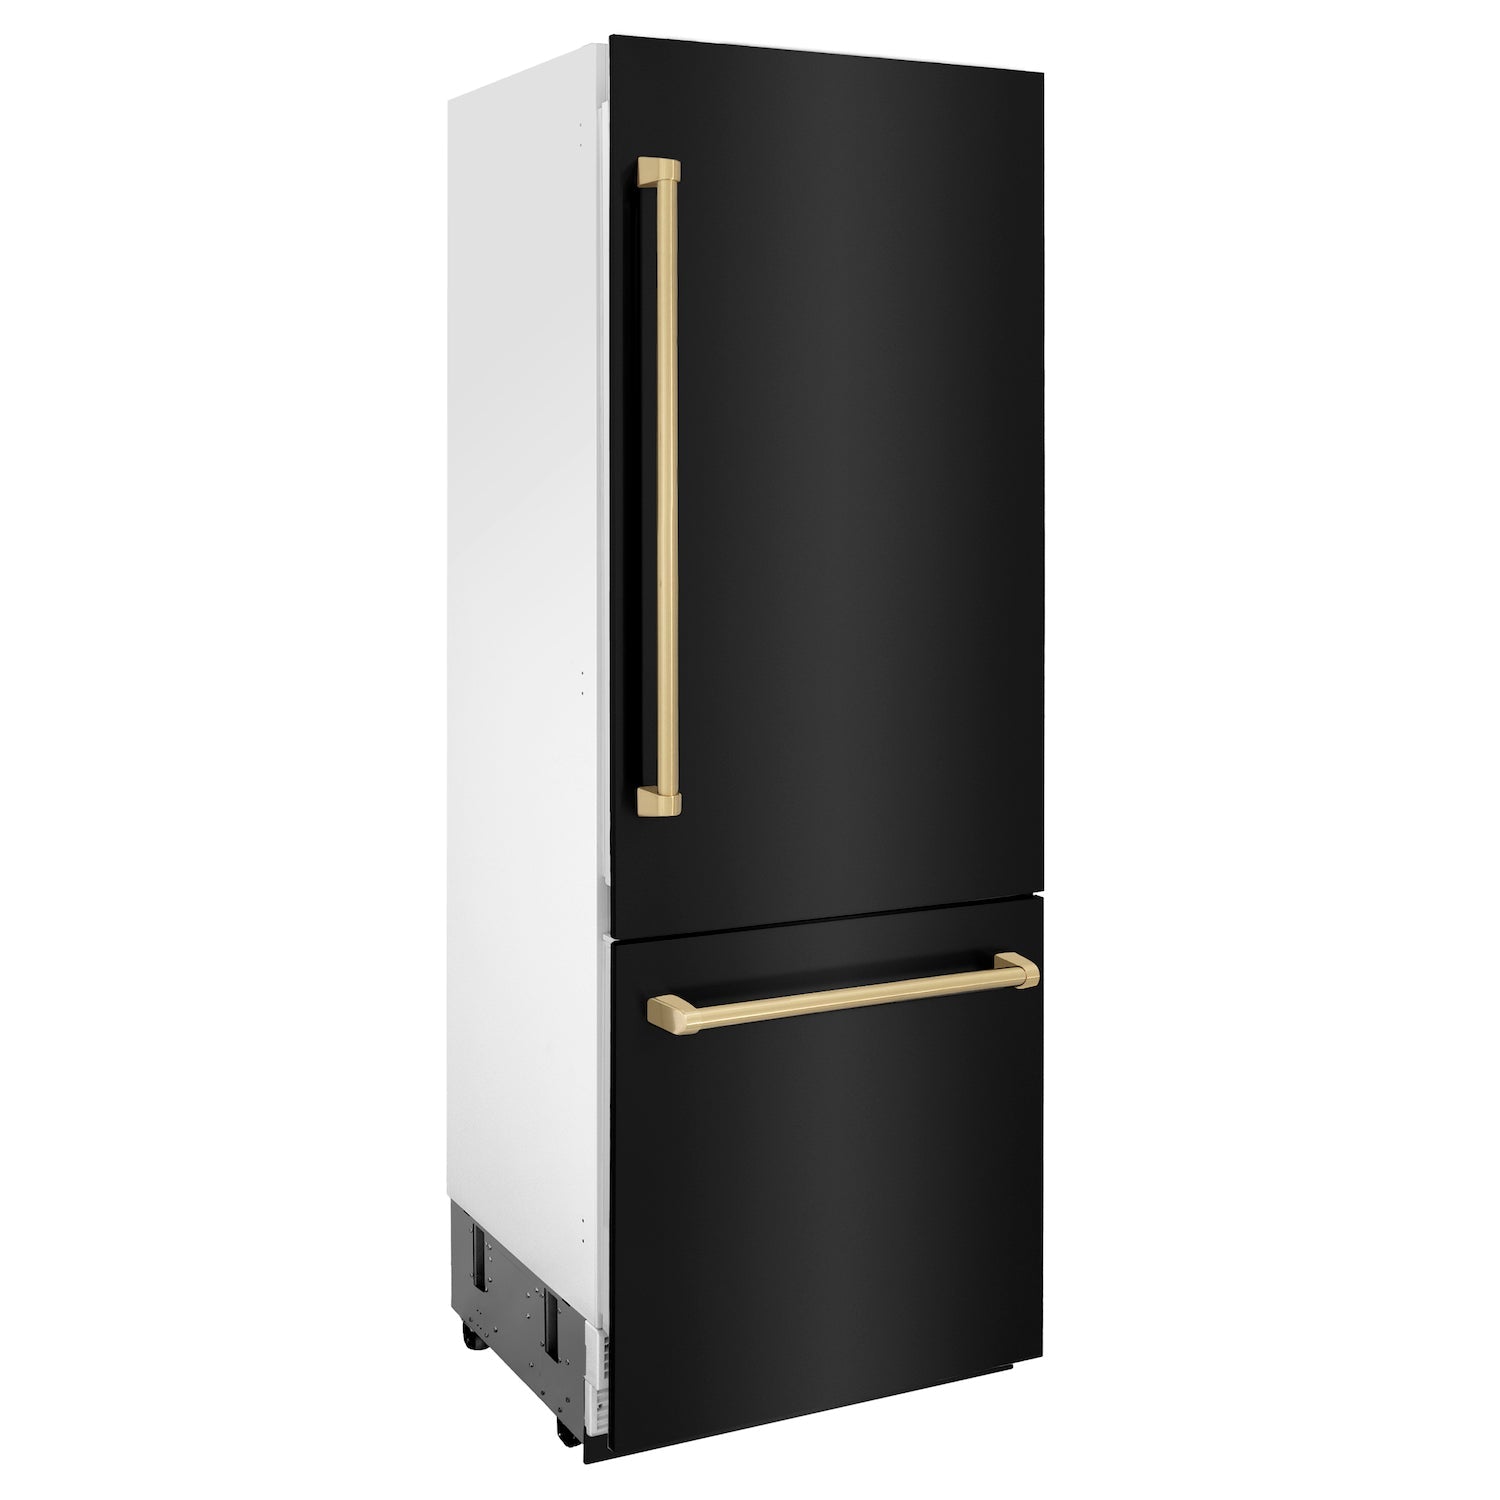 ZLINE 30" Autograph Edition Built-in 2-Door Bottom Freezer Refrigerator - Black Stainless Steel with Champagne Bronze Accents, Internal Water and Ice Dispenser